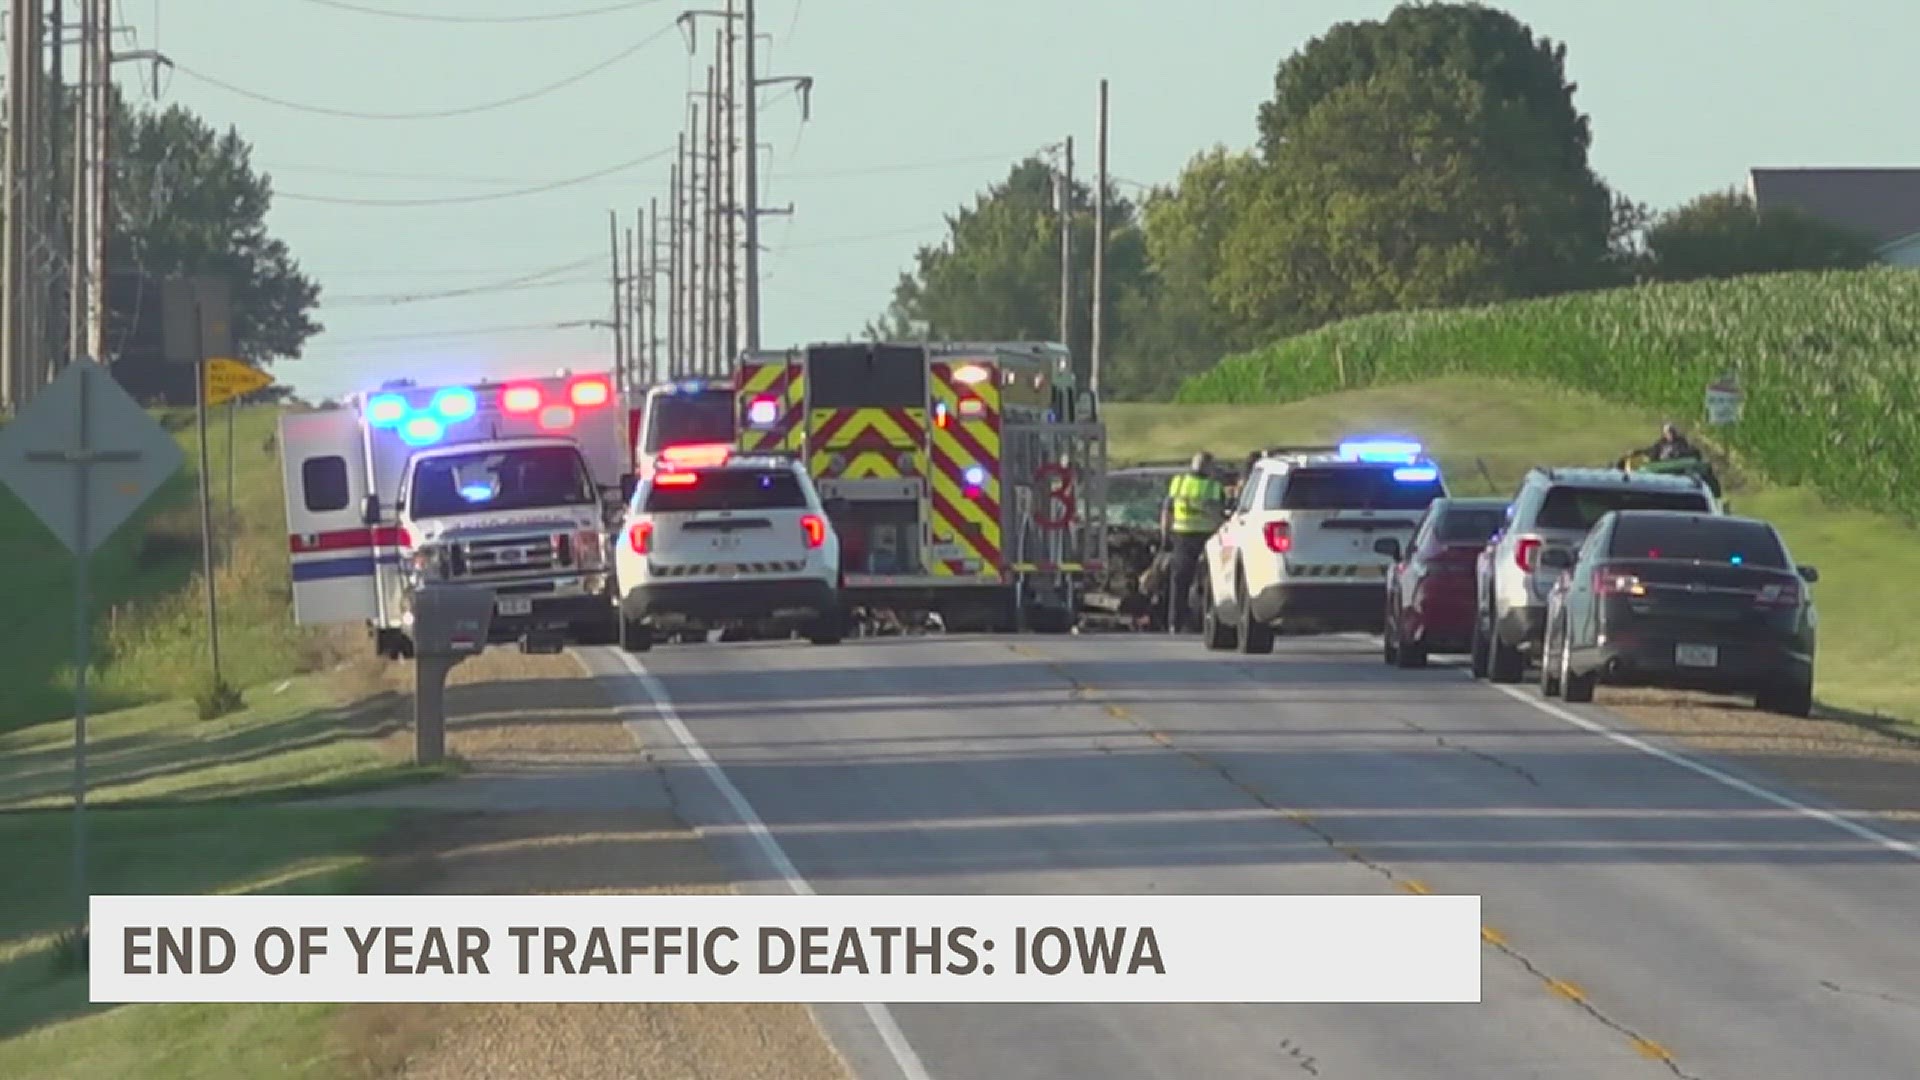 While the Hawkeye state saw an increase in the number of traffic deaths compared to 2022, Illinois saw a decrease.